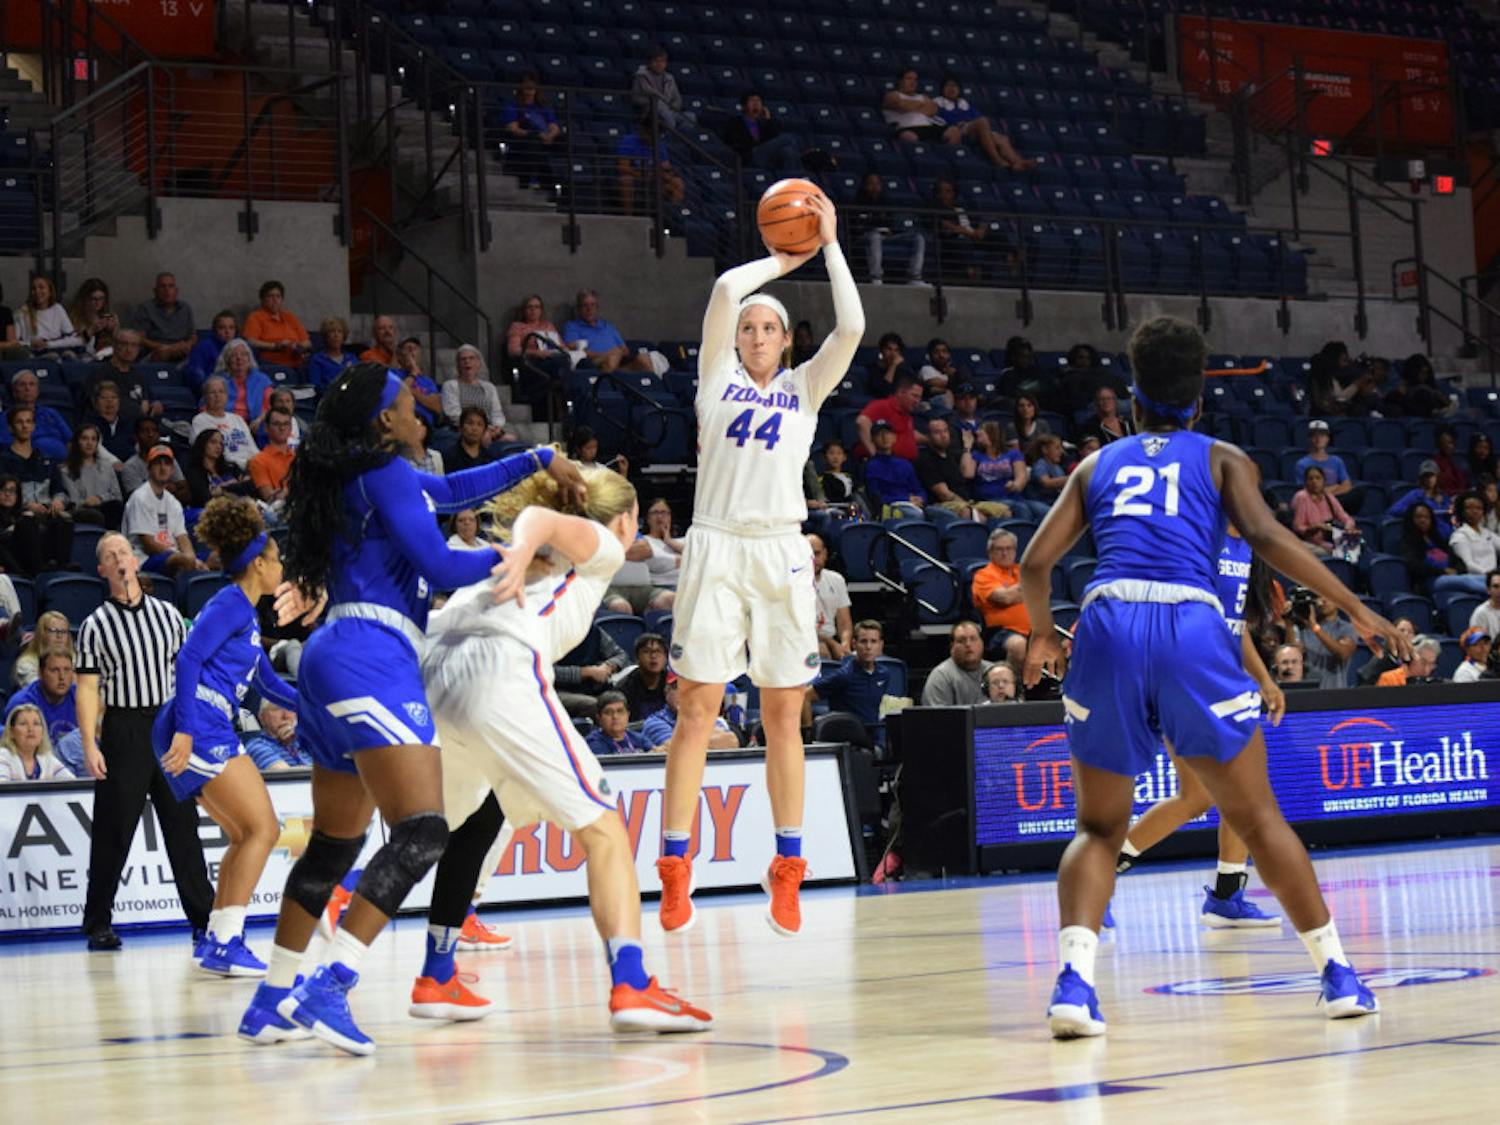 Haley Lorenzen ended the game with 14 points on 55 percent shooting from the field, but could not come up with a bucket late in Thursday night's against Alabama.